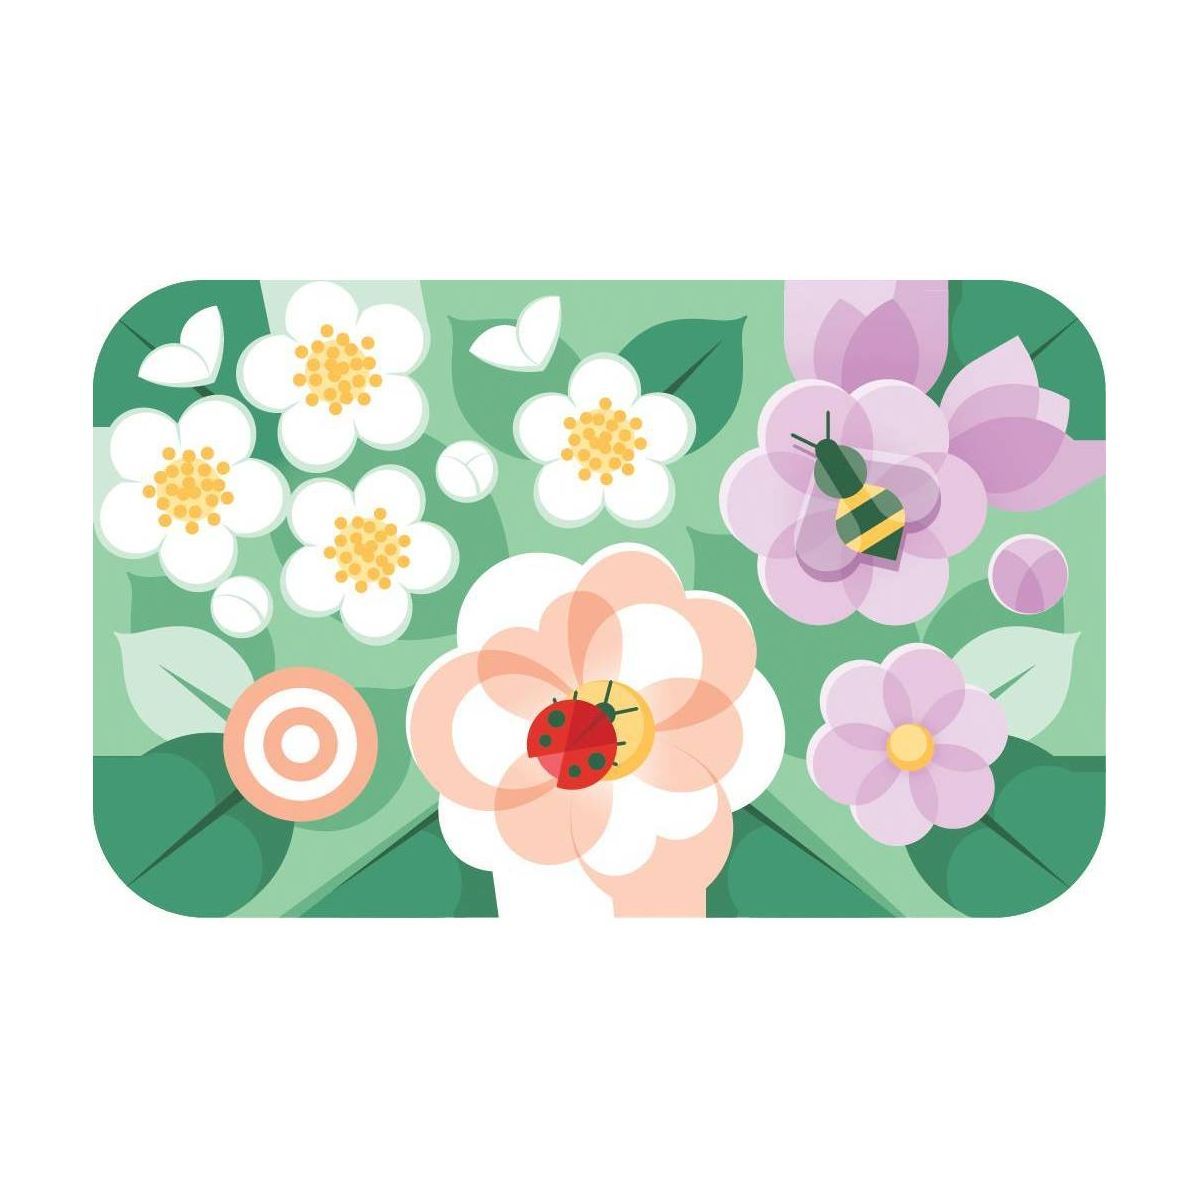 Floral Bouquet Paper Target GiftCard | Target